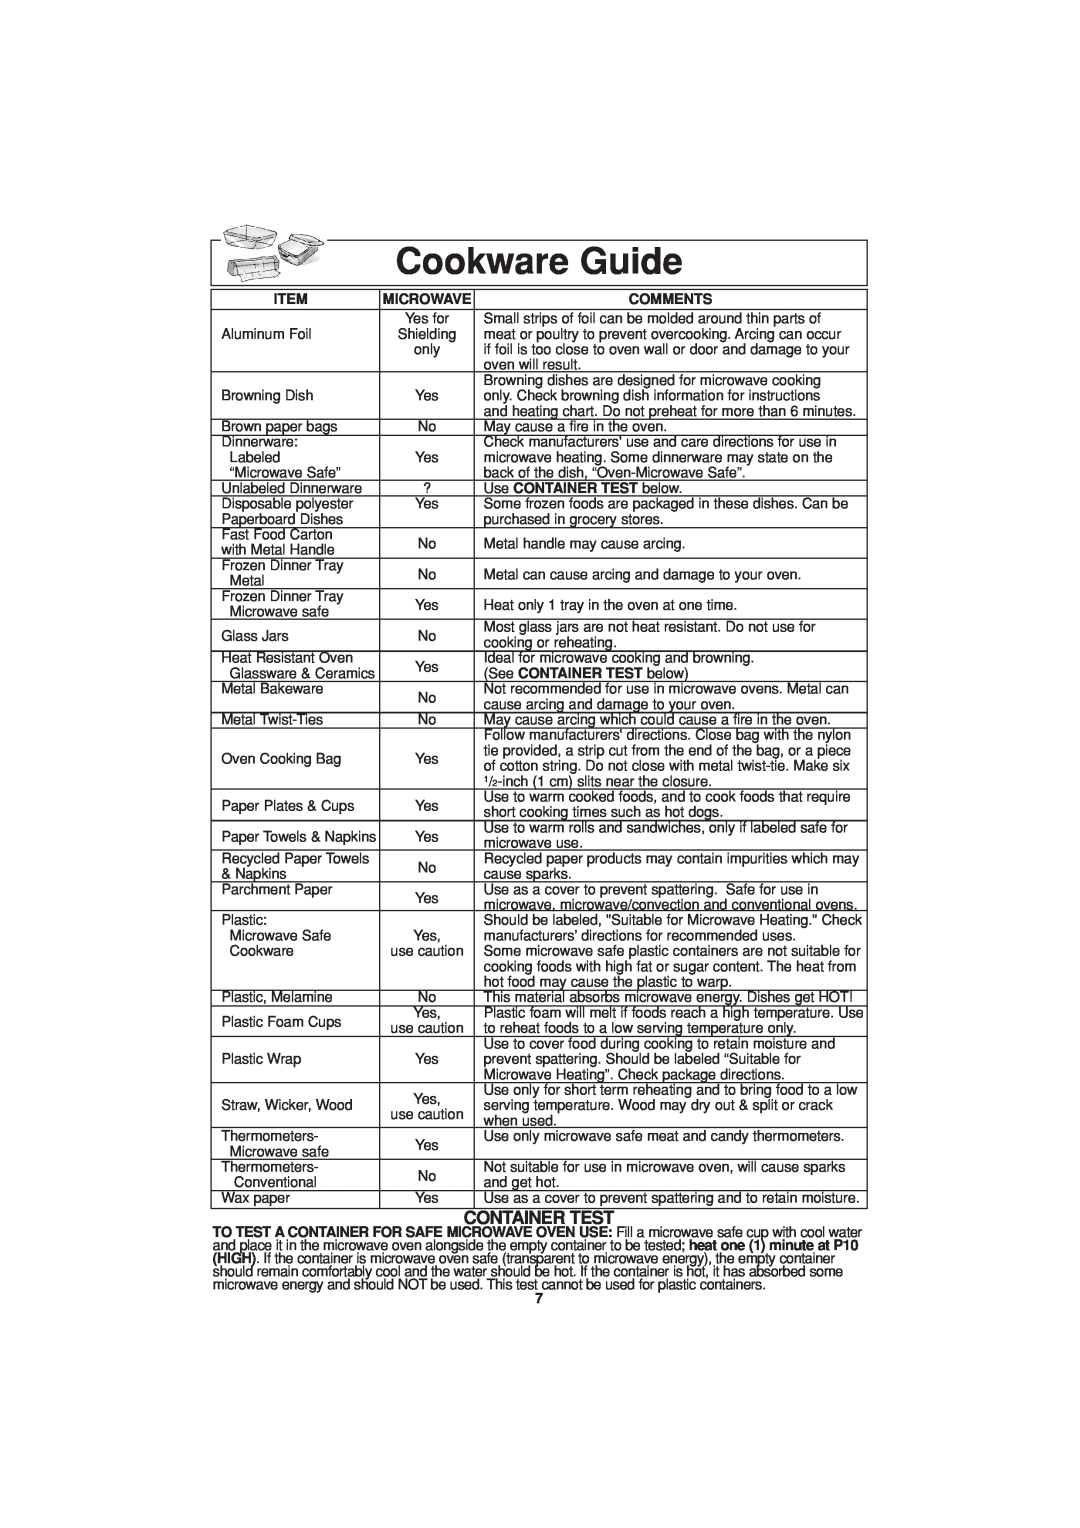 Panasonic NN-H624 operating instructions Cookware Guide, Container Test 